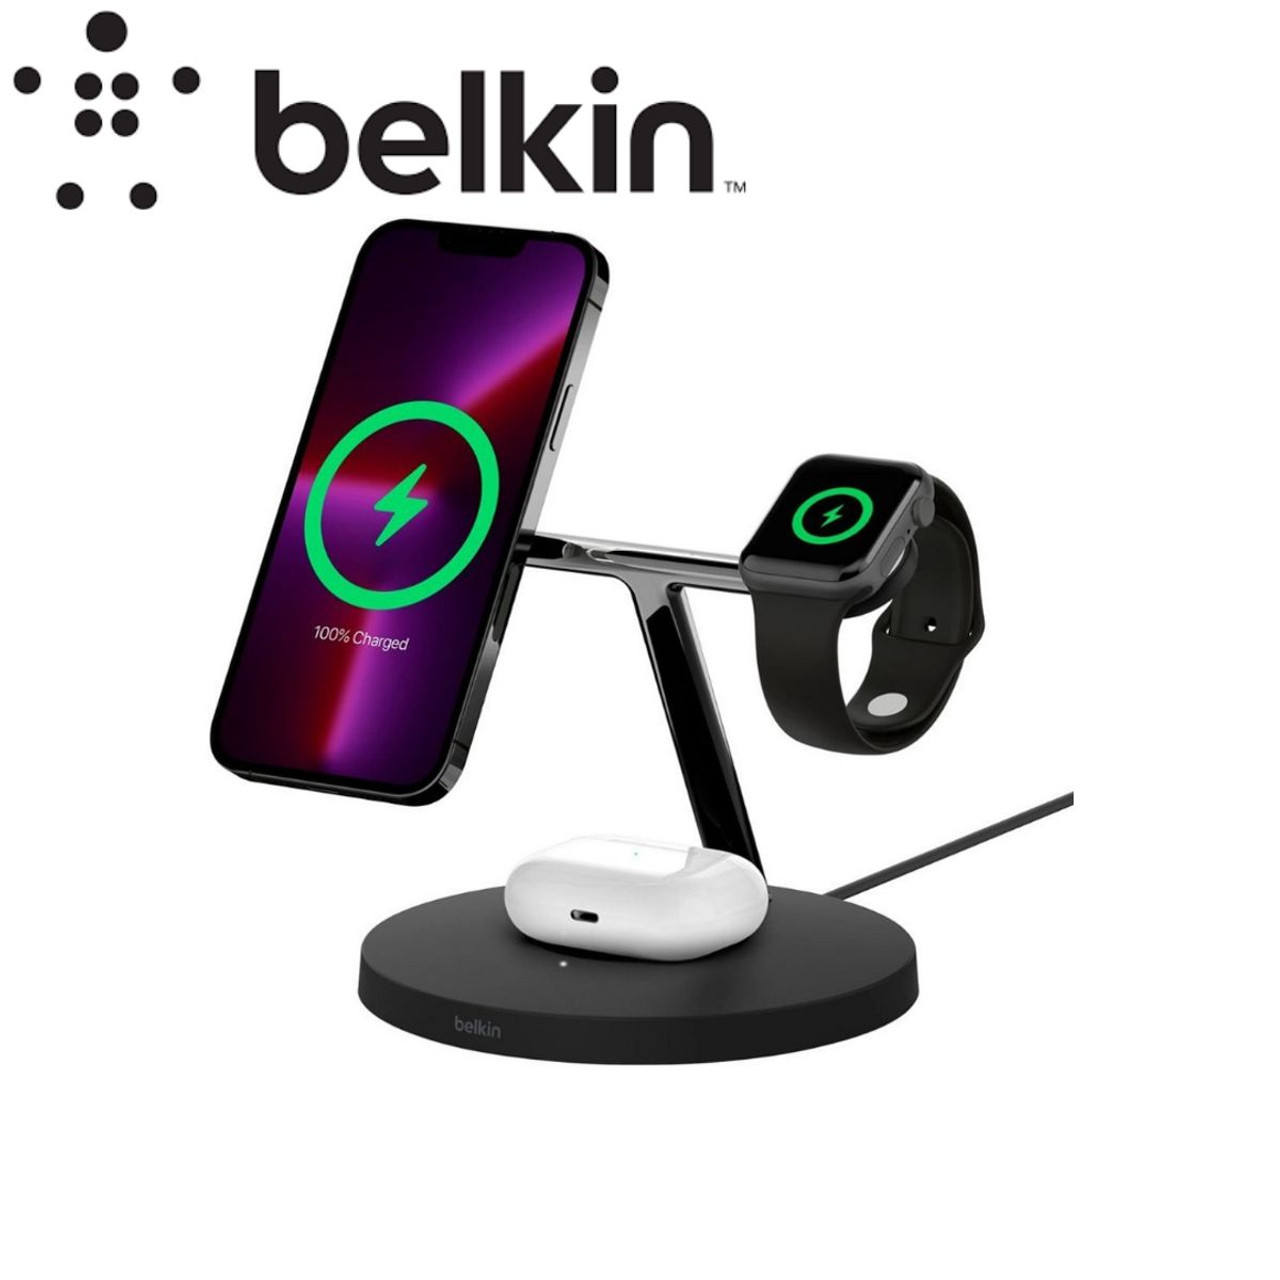 Belkin BoostCharge Pro 3-in-1 MagSafe Wireless Charger product image